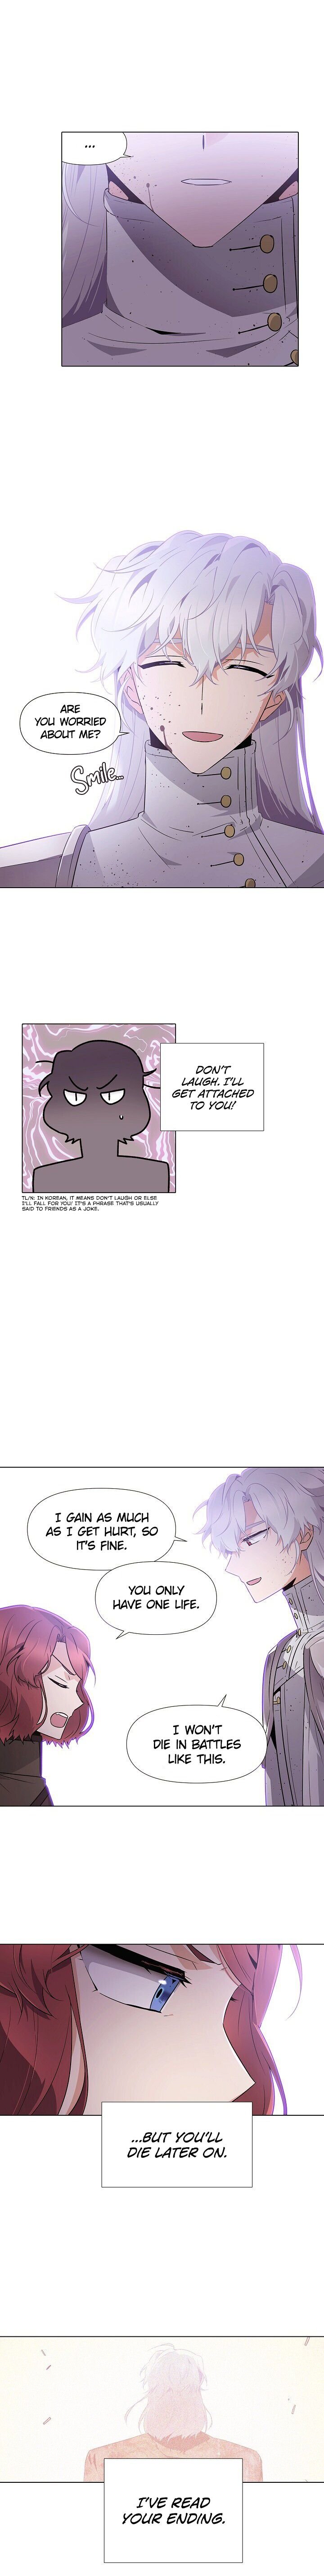 The Villain Discovered My Identity Chapter 23 - Page 7